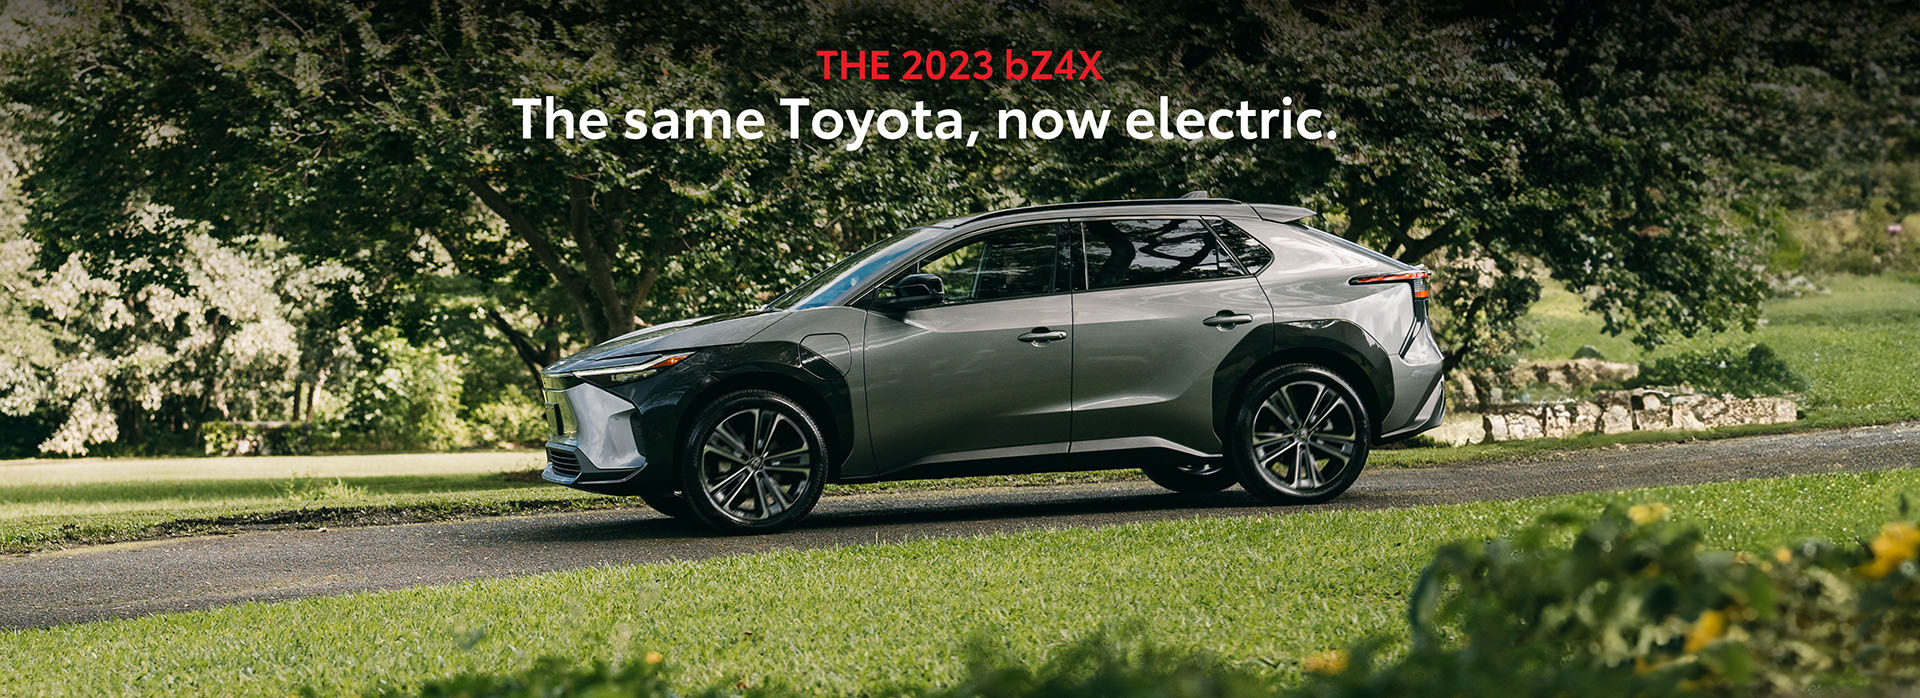 The 2023 bZ4X. The same Toyota, now electric. 